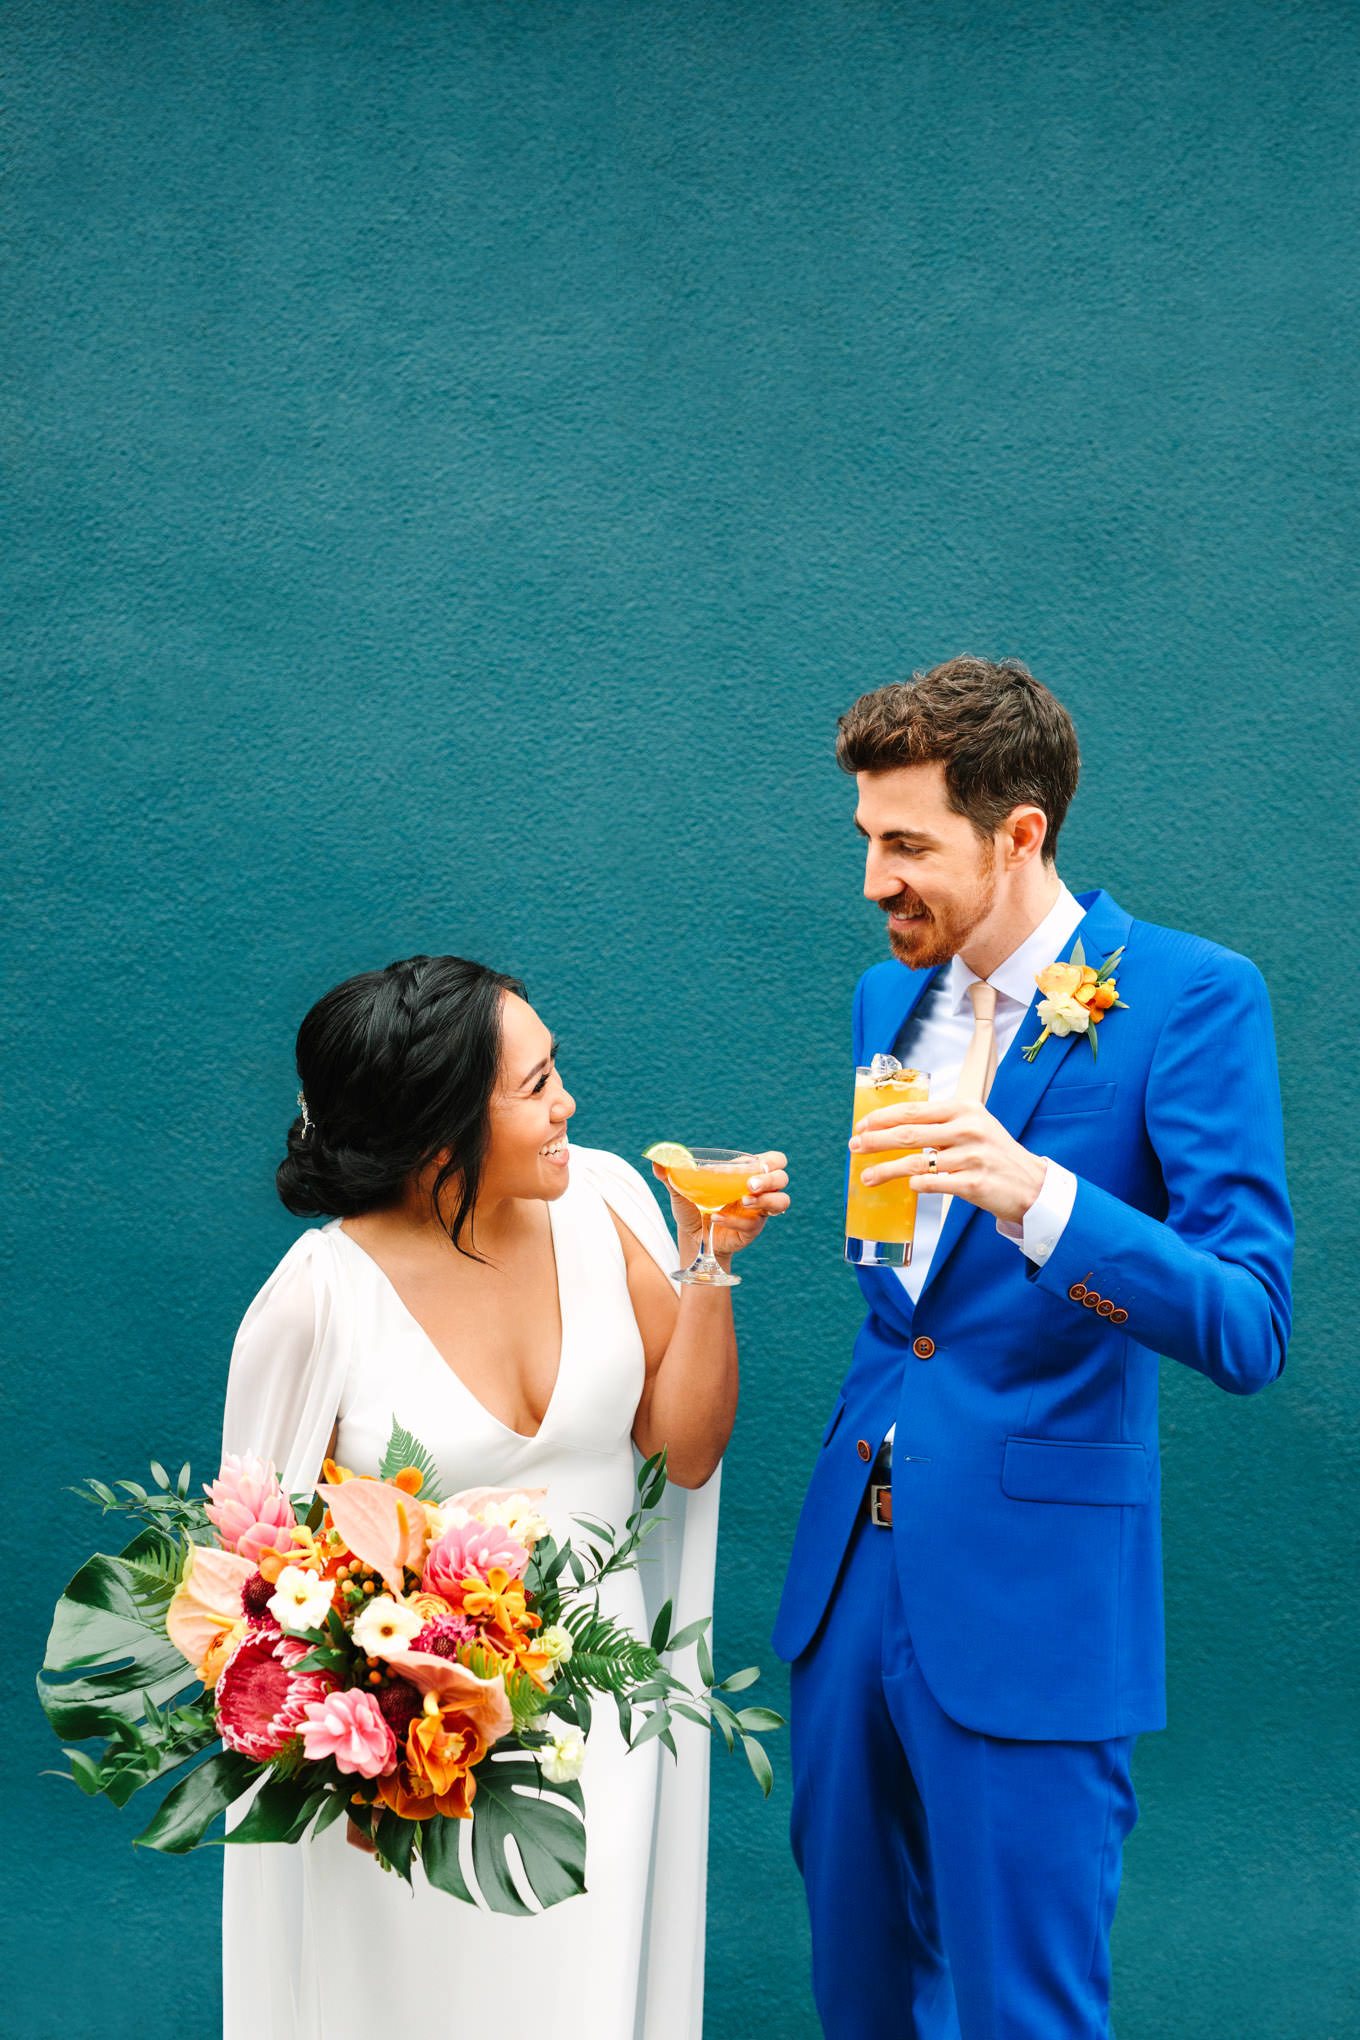 Bride and groom with cocktails | TV inspired wedding at The Fig House Los Angeles | Published on The Knot | Fresh and colorful photography for fun-loving couples in Southern California | #losangeleswedding #TVwedding #colorfulwedding #theknot   Source: Mary Costa Photography | Los Angeles wedding photographer